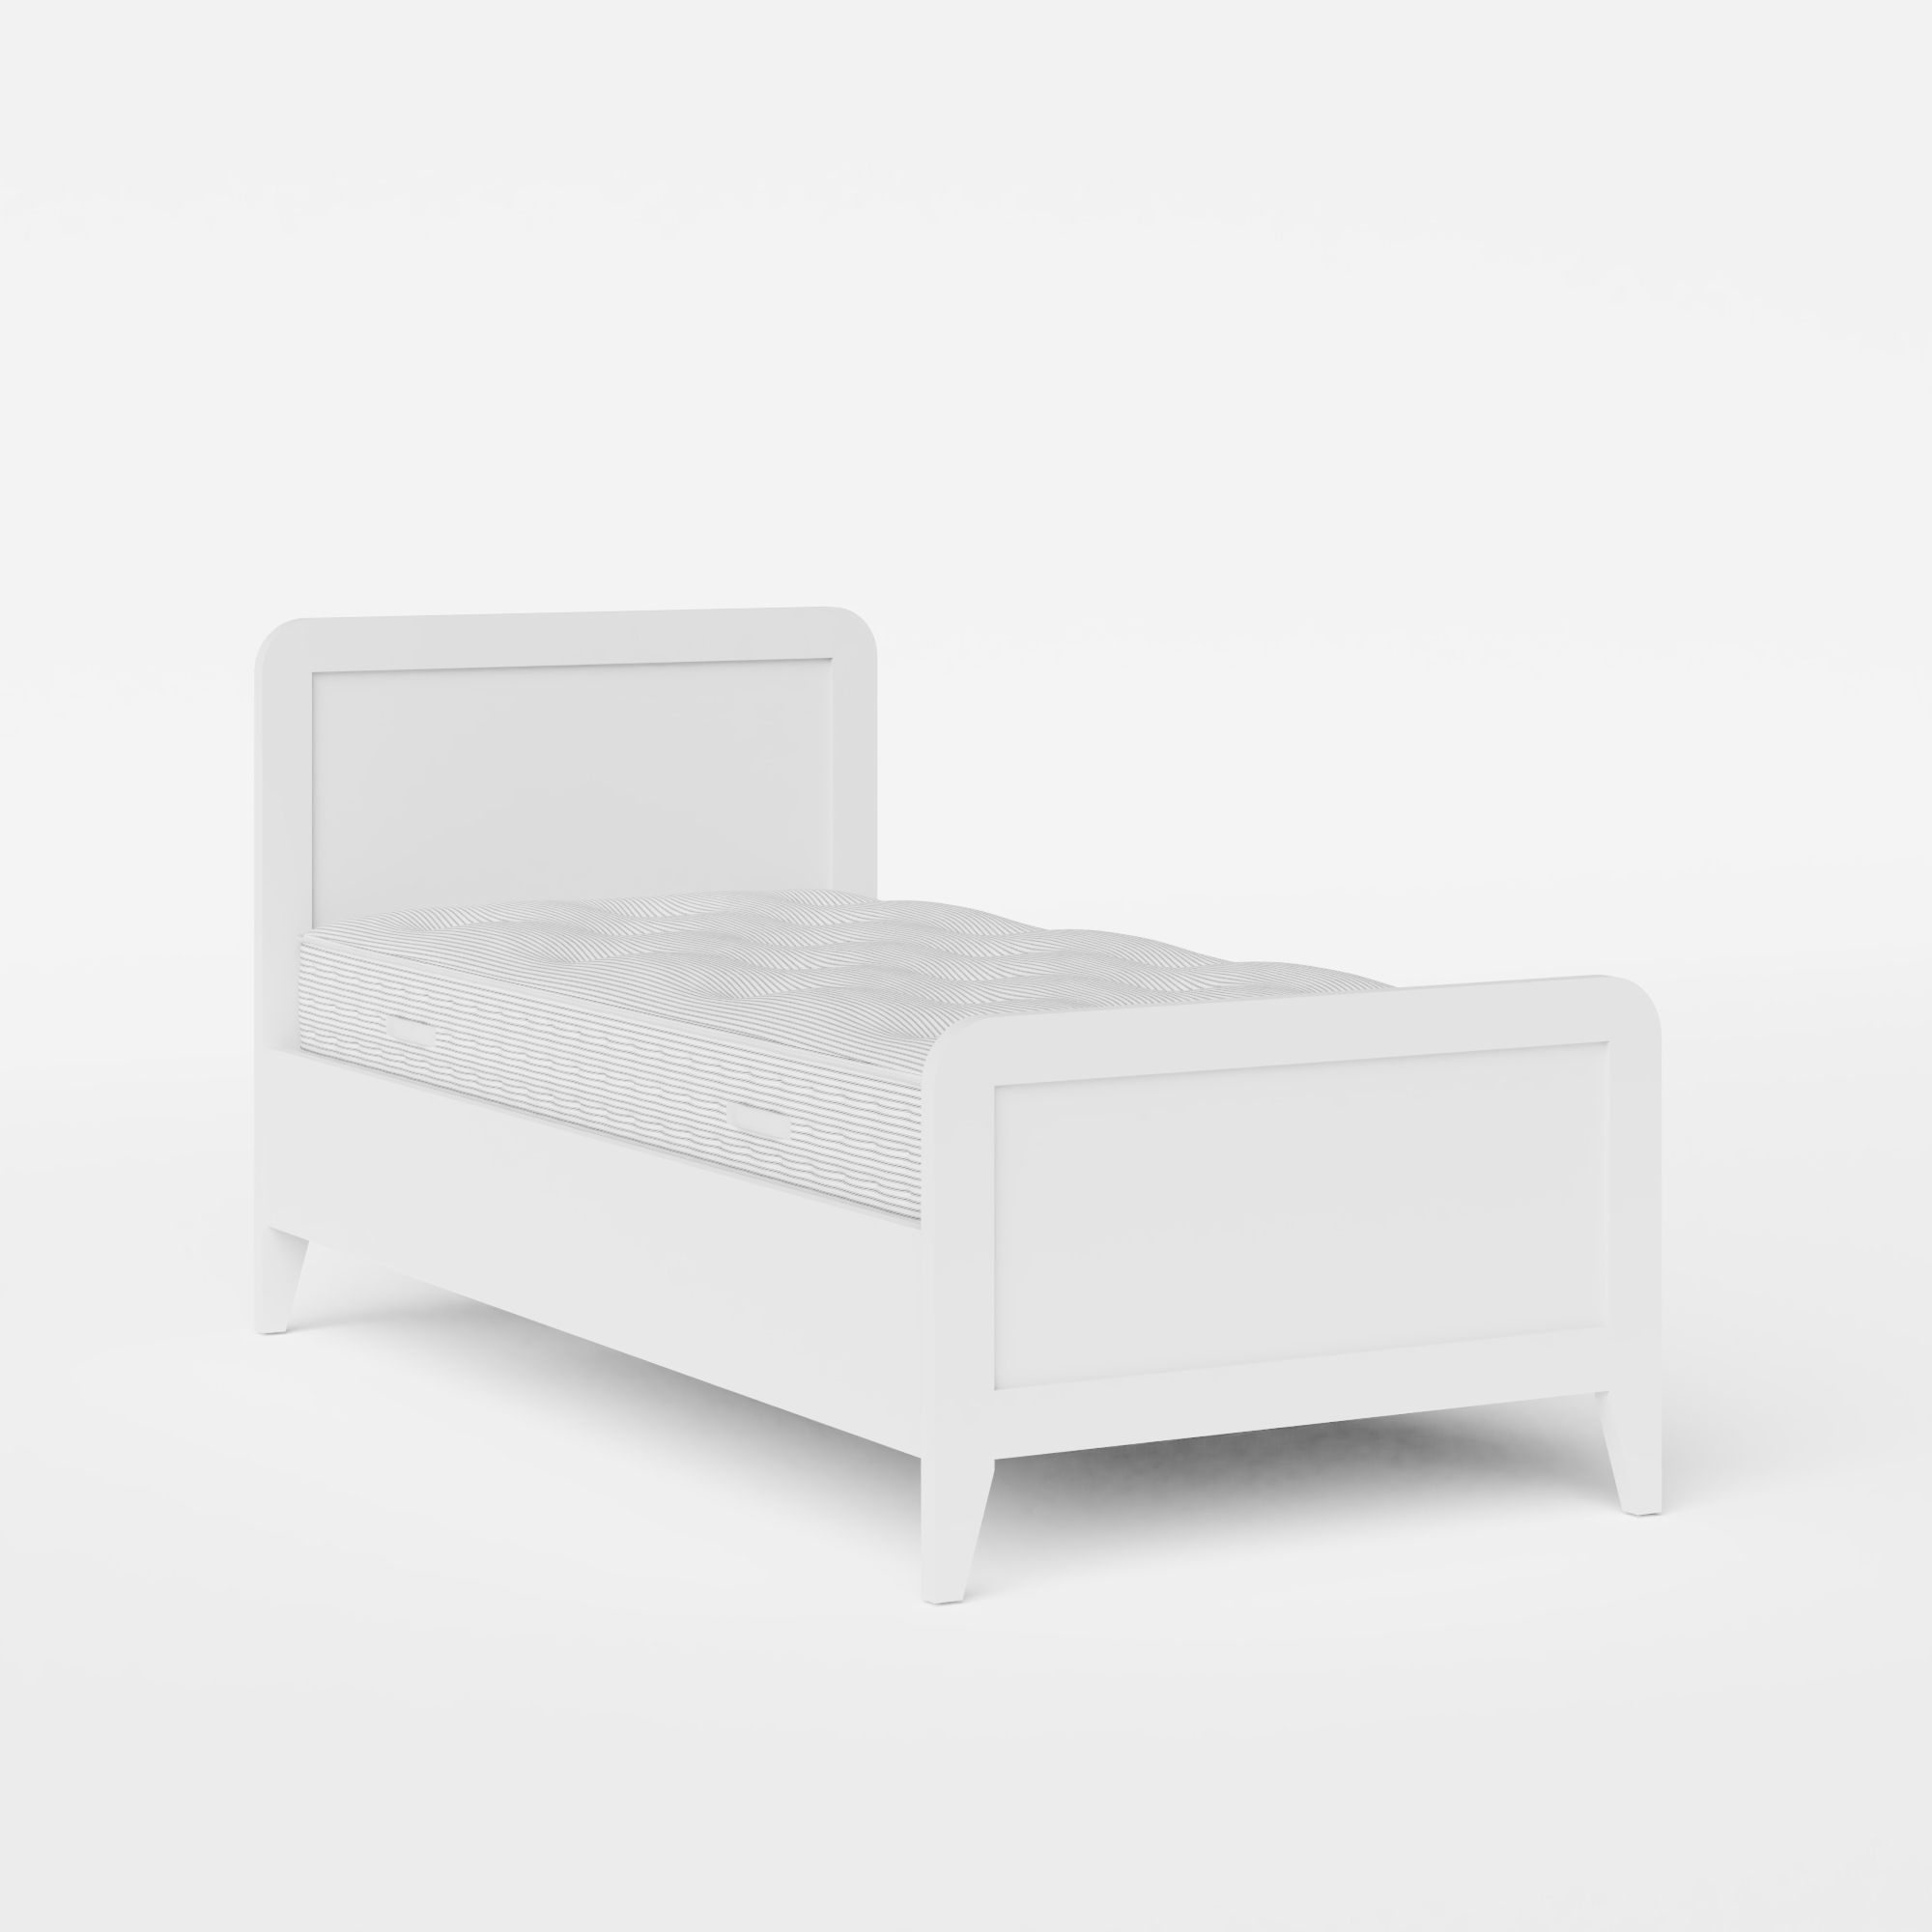 Keats Painted single painted wood bed in white with Juno mattress